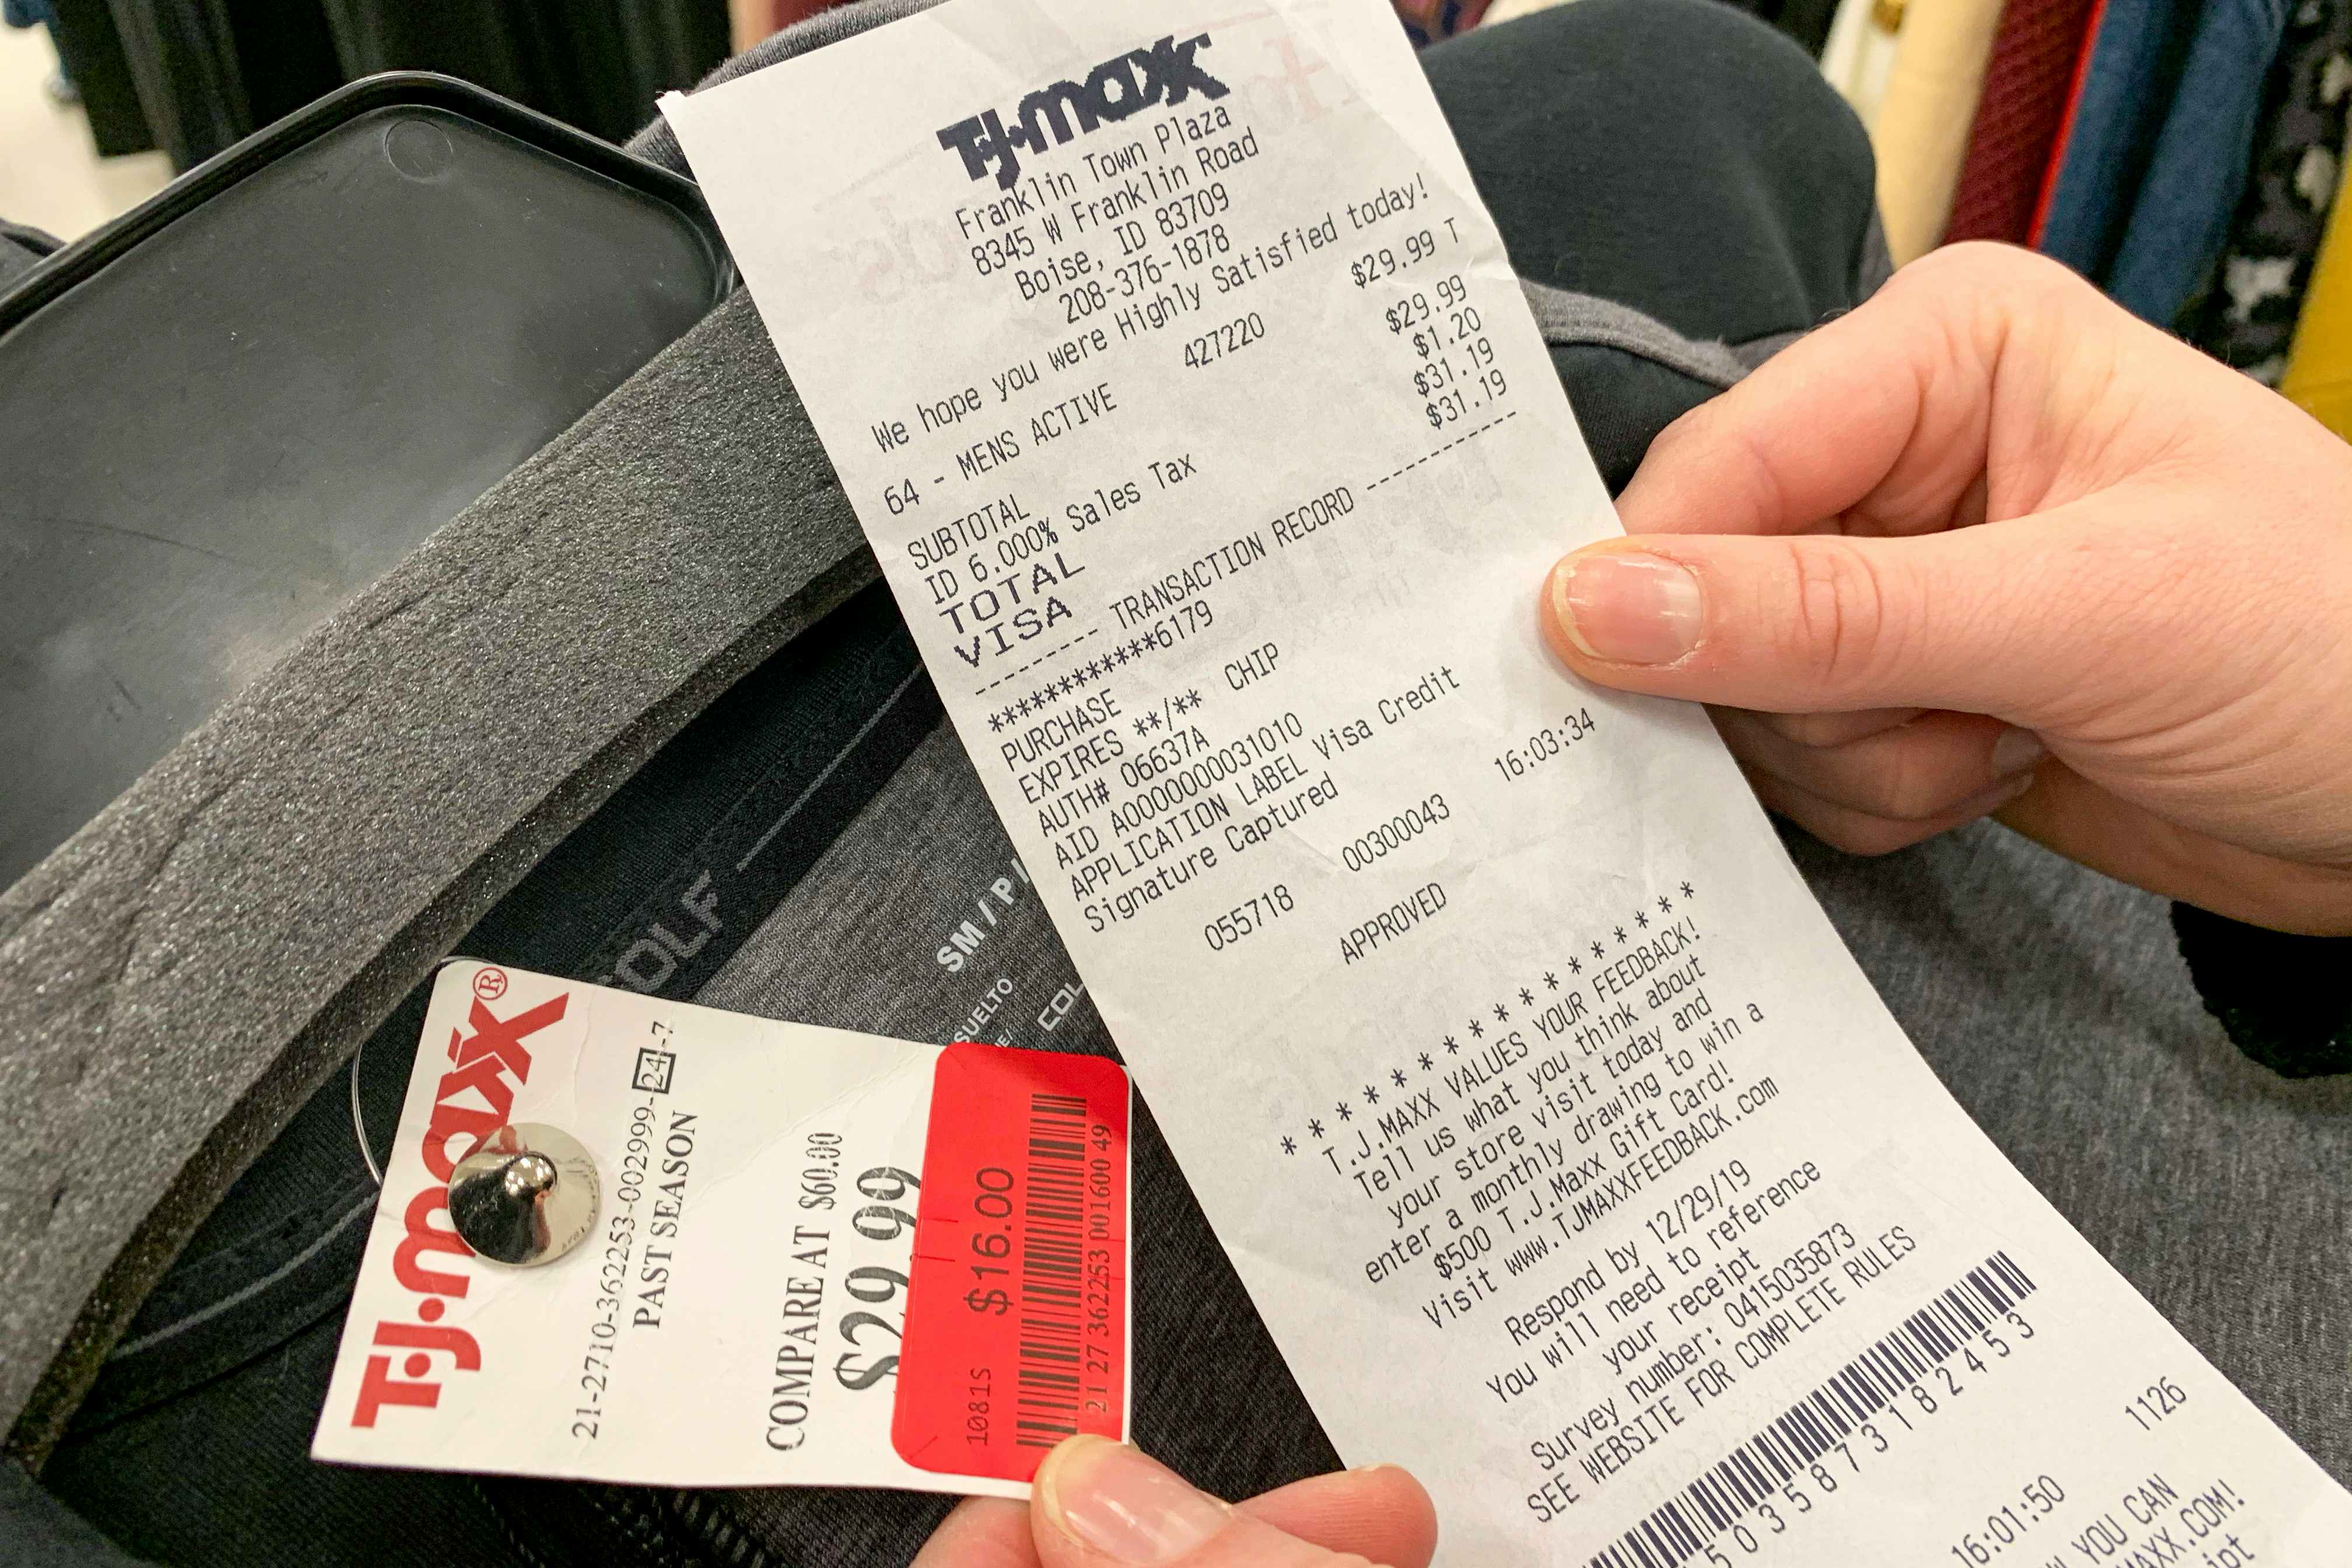 People Think TJ Maxx (TJX) Has Better Prices Than Mighty  (AMZN) -  TheStreet